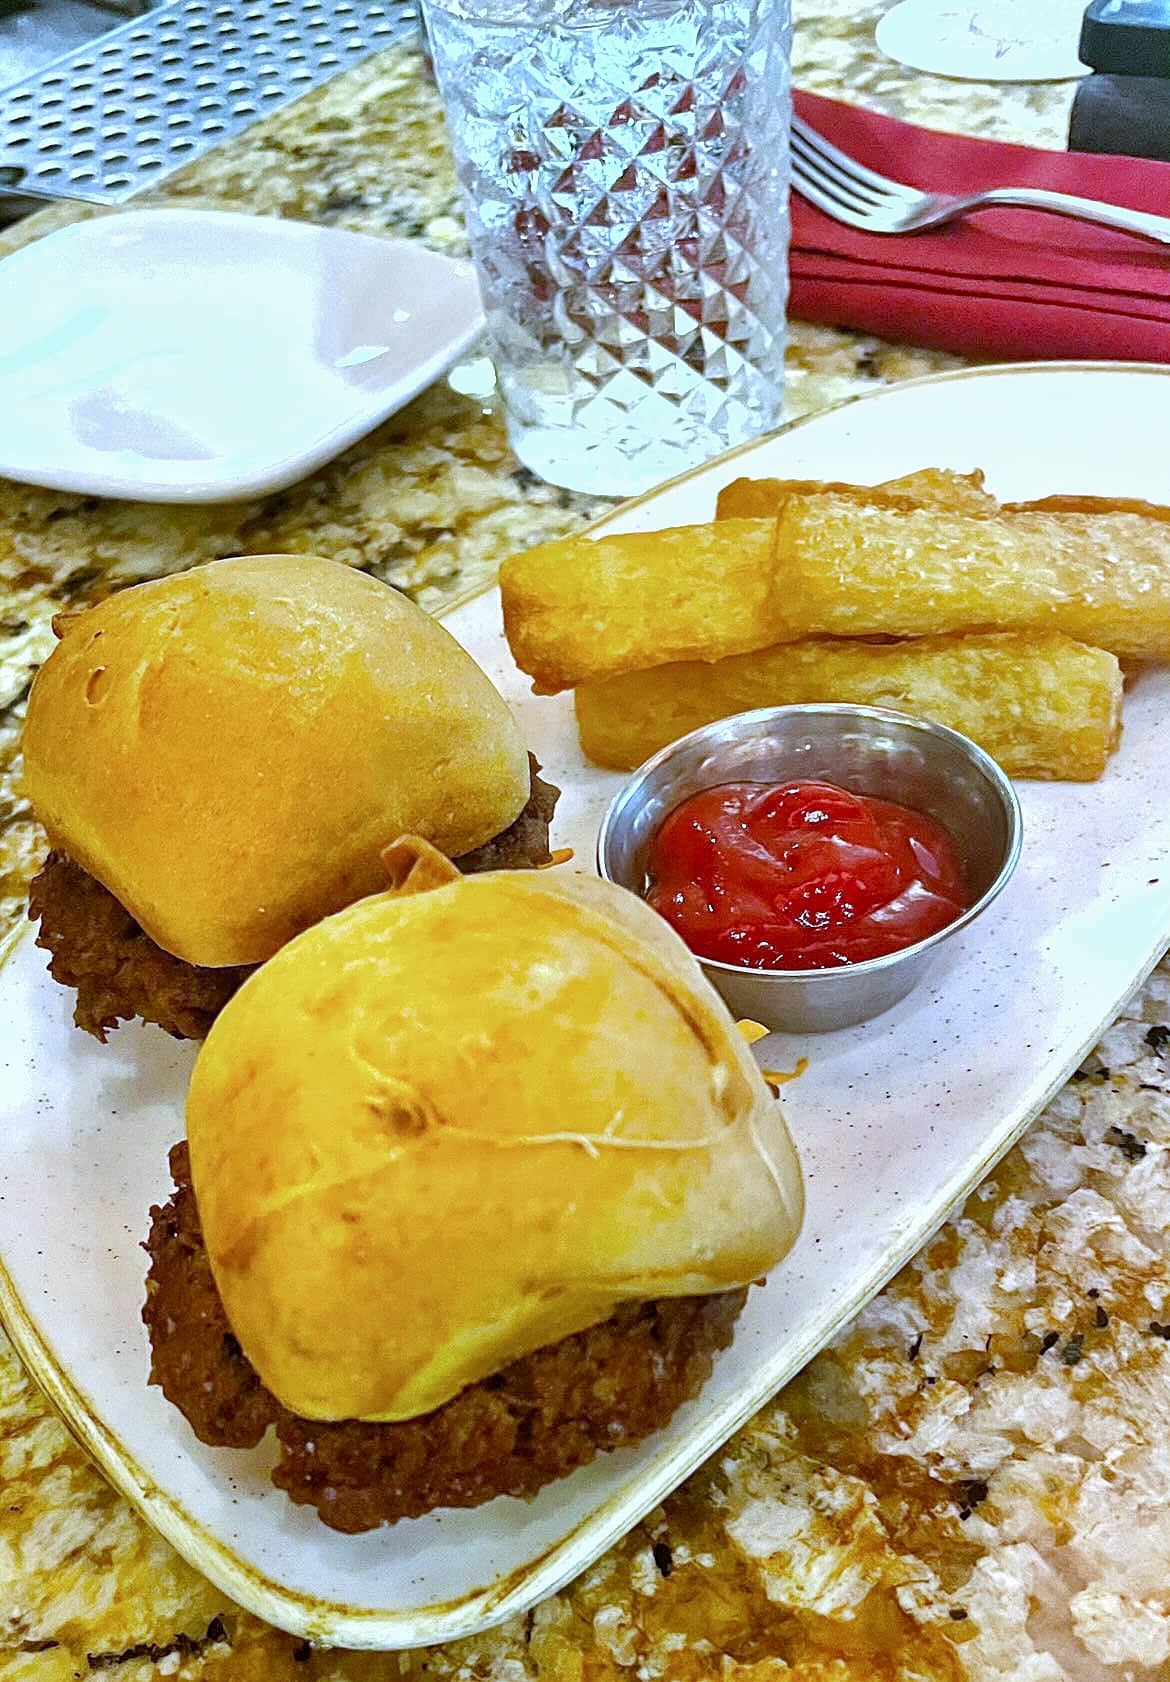 Impossible Sliders Nomad Lounge